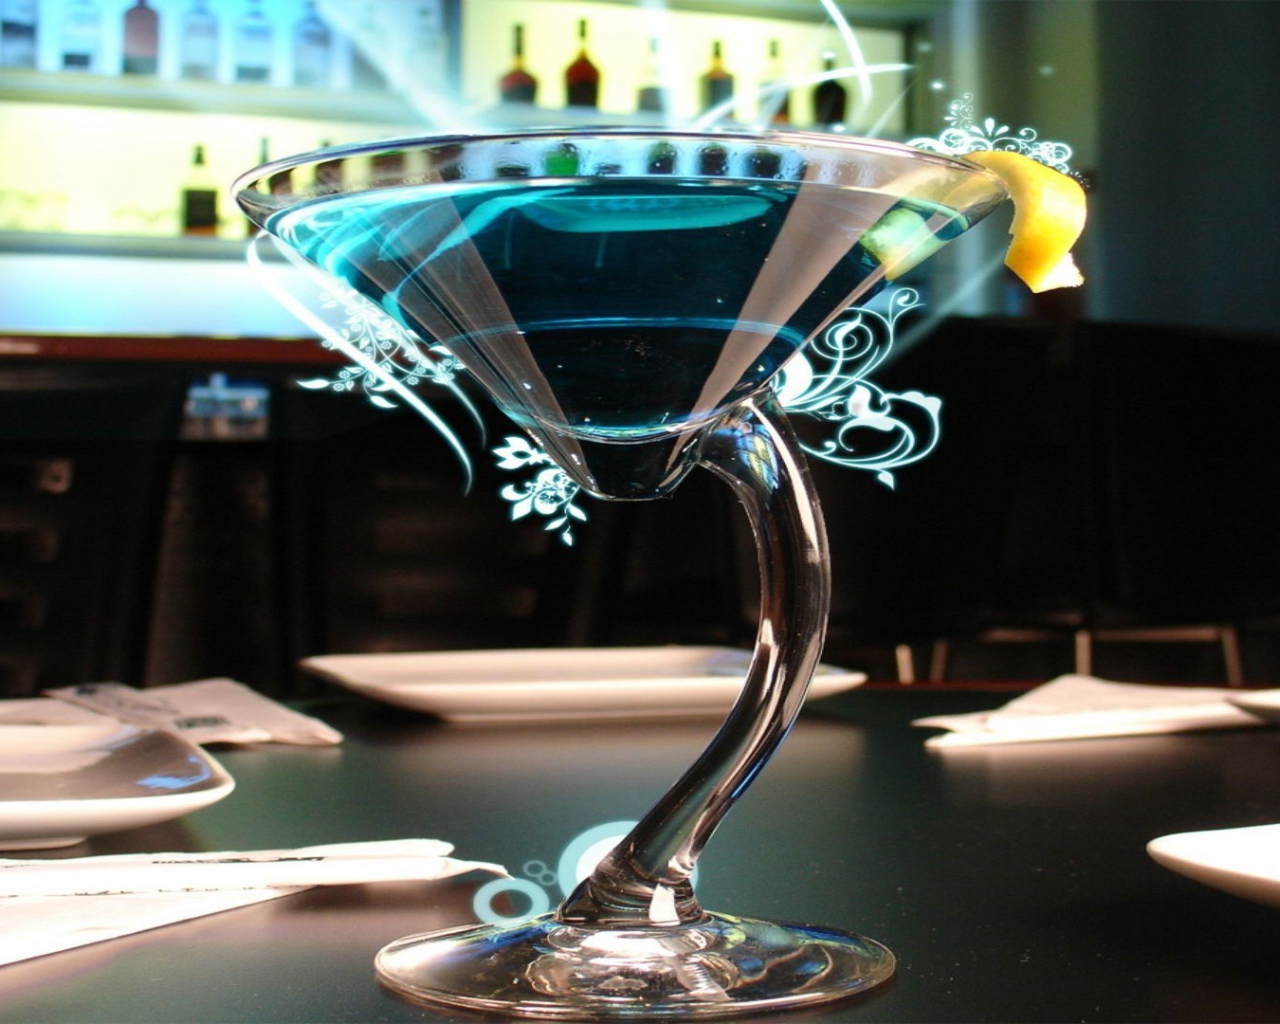 The original glass with cocktail